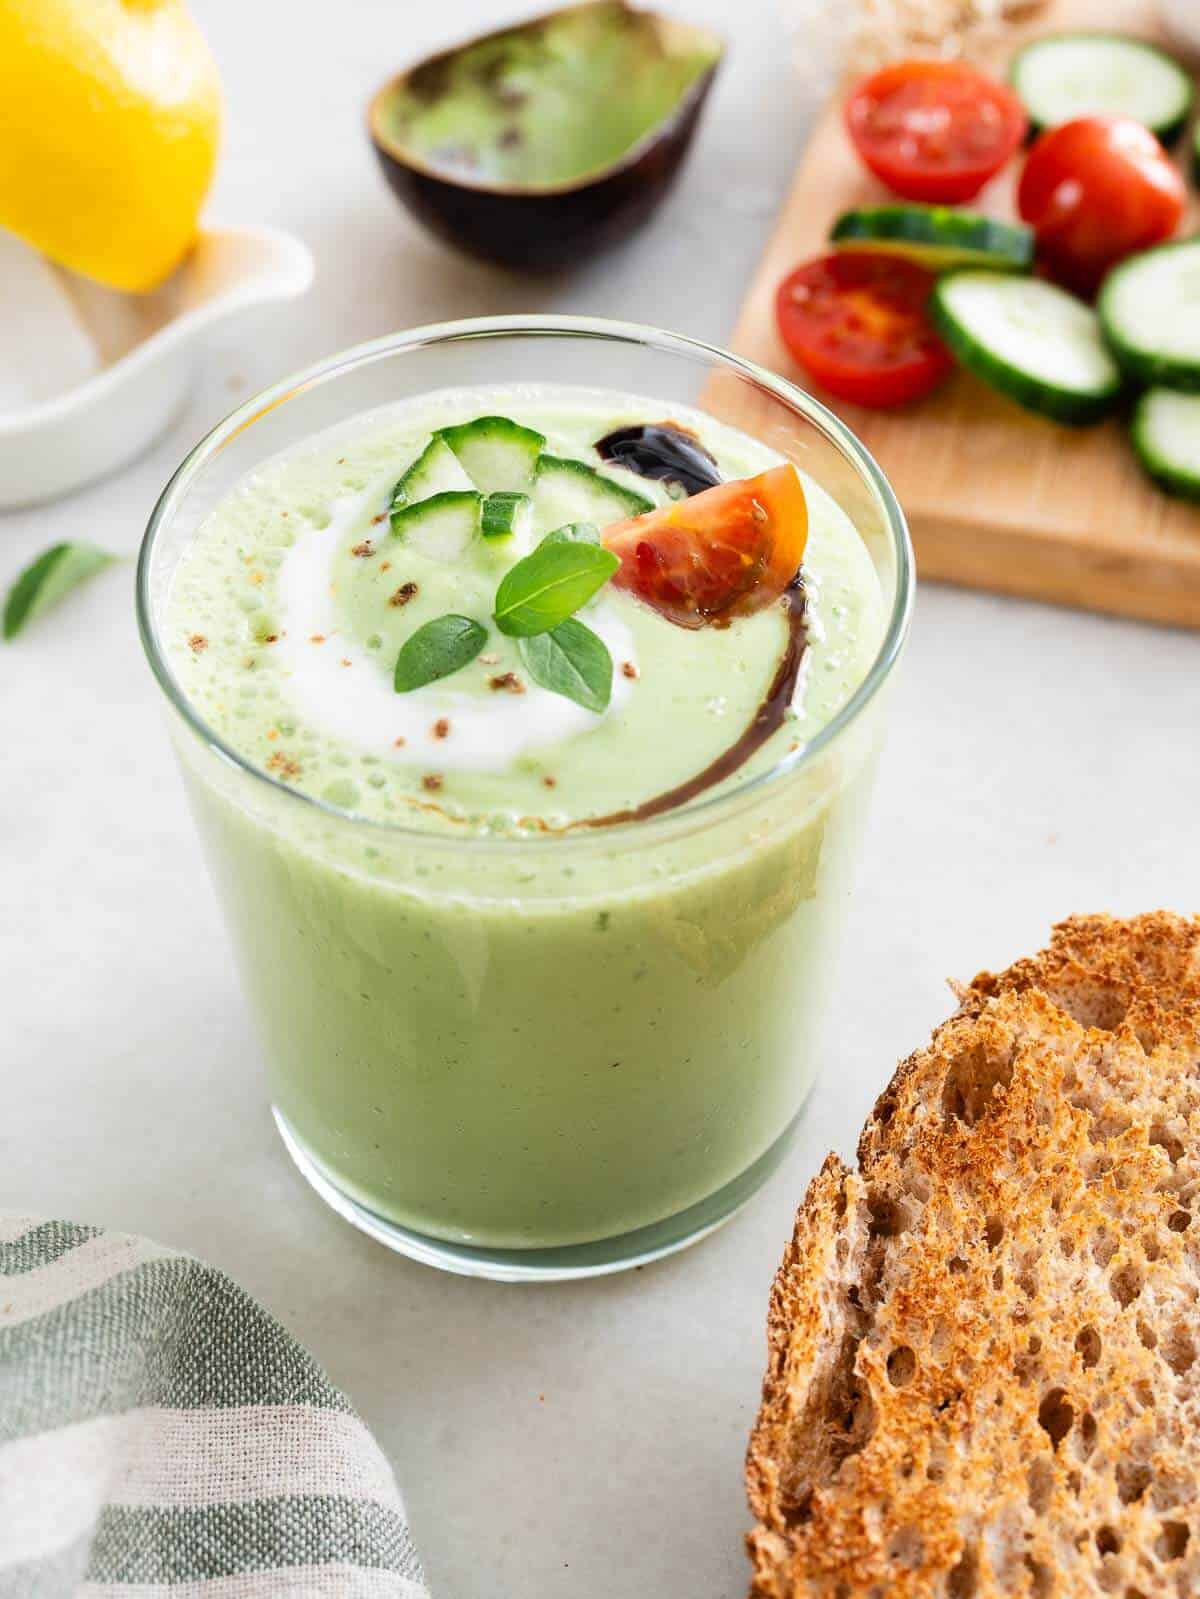 A vibrant glass of creamy green cucumber soup, garnished with a swirl of white yogurt, diced cucumber, a slice of cherry tomato, and fresh basil leaves. In the background, half an avocado, a lemon, sliced cucumbers, cherry tomatoes, and a slice of whole-grain bread rest on a kitchen counter.